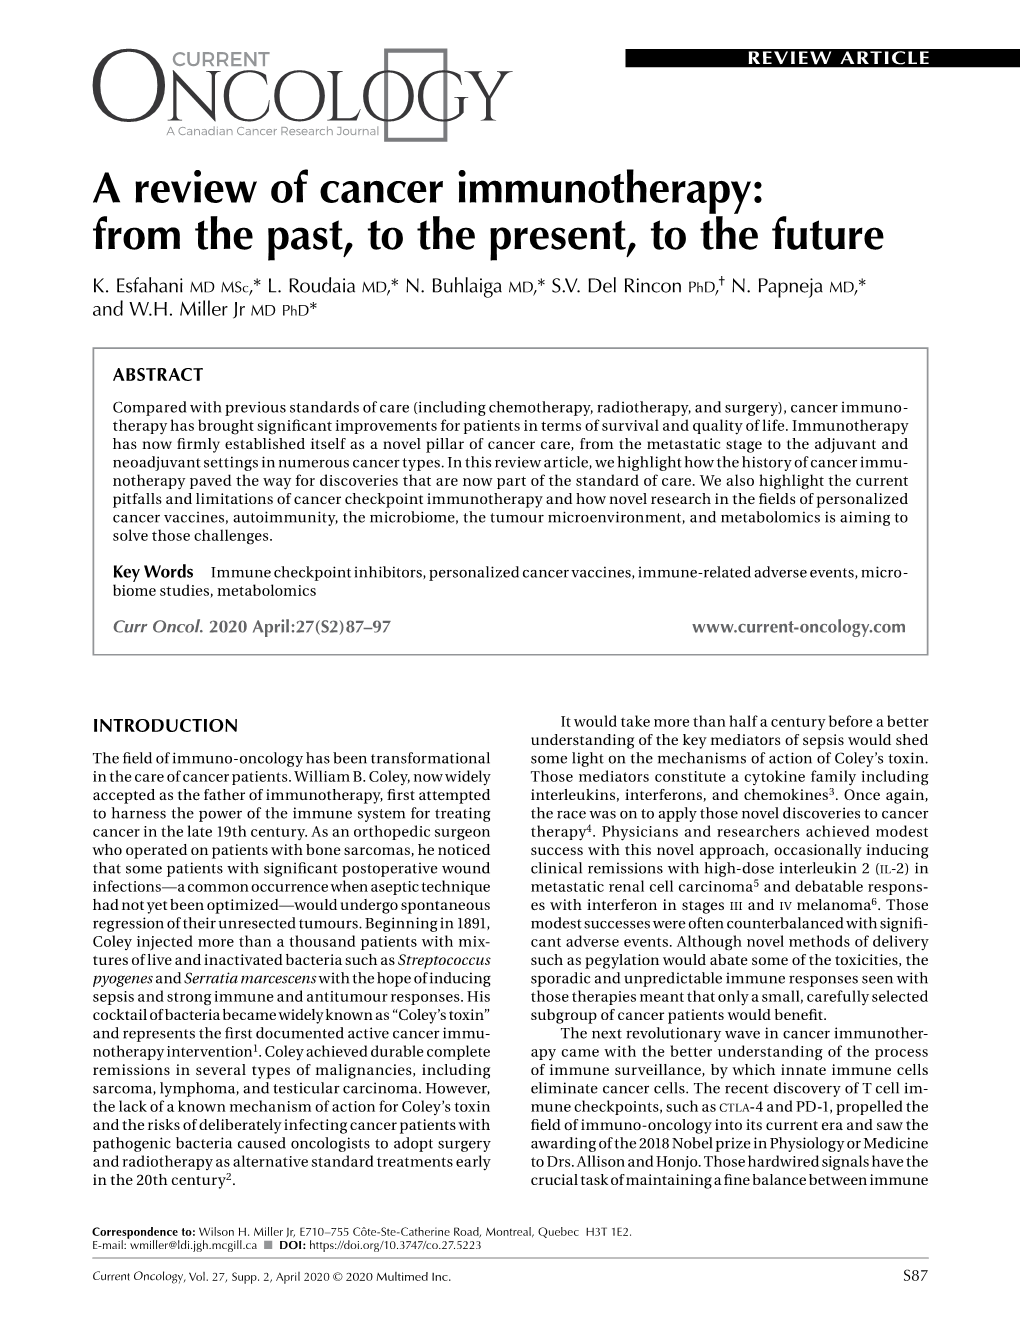 A Review of Cancer Immunotherapy: from the Past, to the Present, to the Future